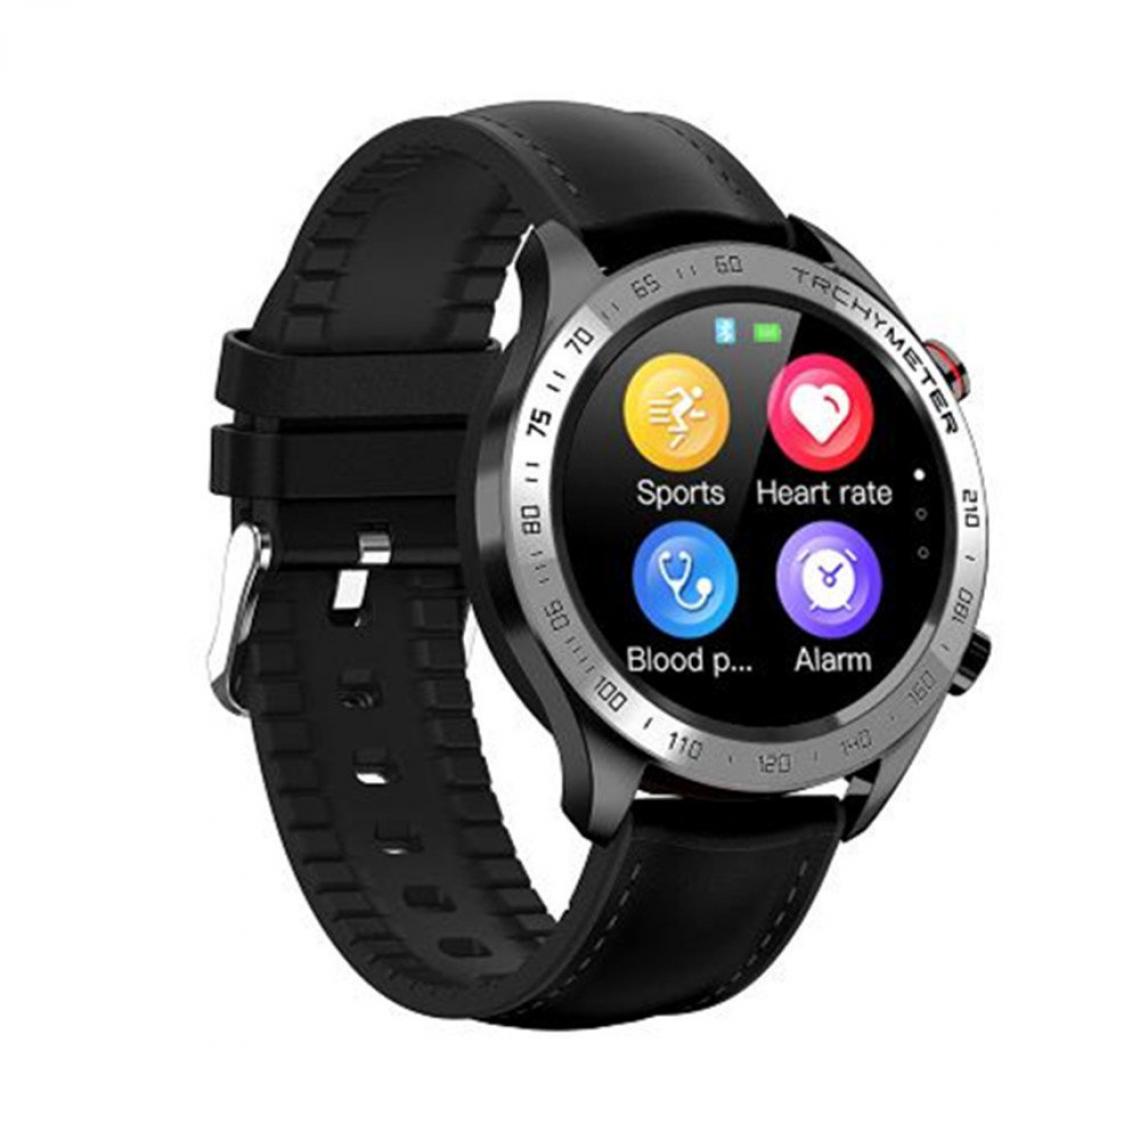 Chronotech Montres - Chronus Smart watch for Men Women Android IOS Phones, IP68 Waterproof Bluetooth Smart Watch with Message Notification, Fitness tracker Blood Pressure Heart Rate Monitor(black) - Montre connectée